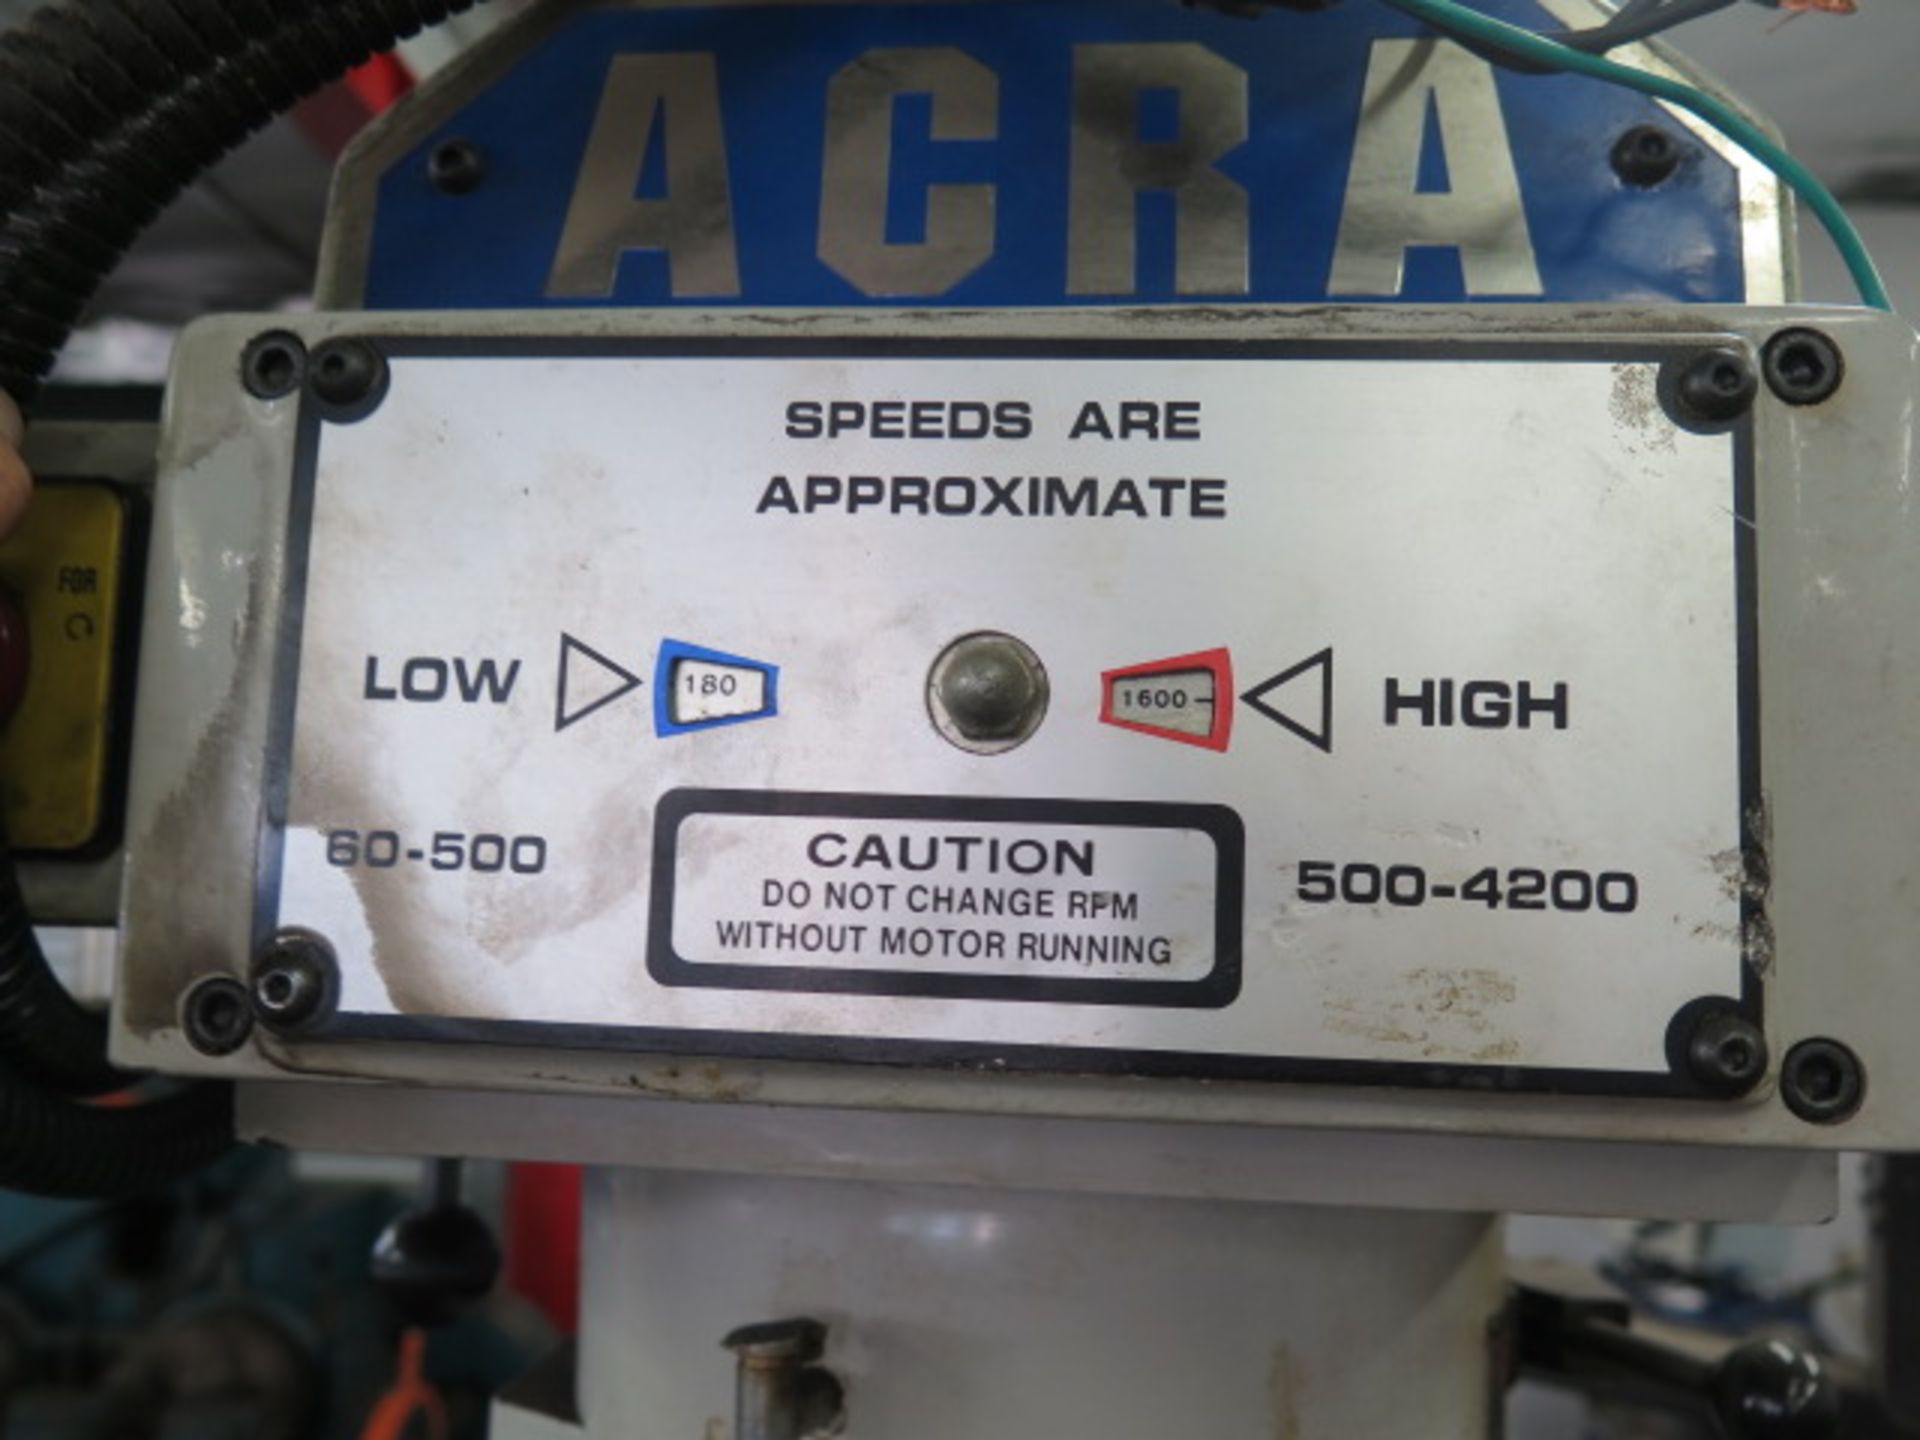 Acra AM-3 Vertical Mill s/n 961819 w/ Sargon 3-Axis DRO, 3Hp Motor, 60-4200 Dial RPM, Sold AS IS - Image 4 of 13